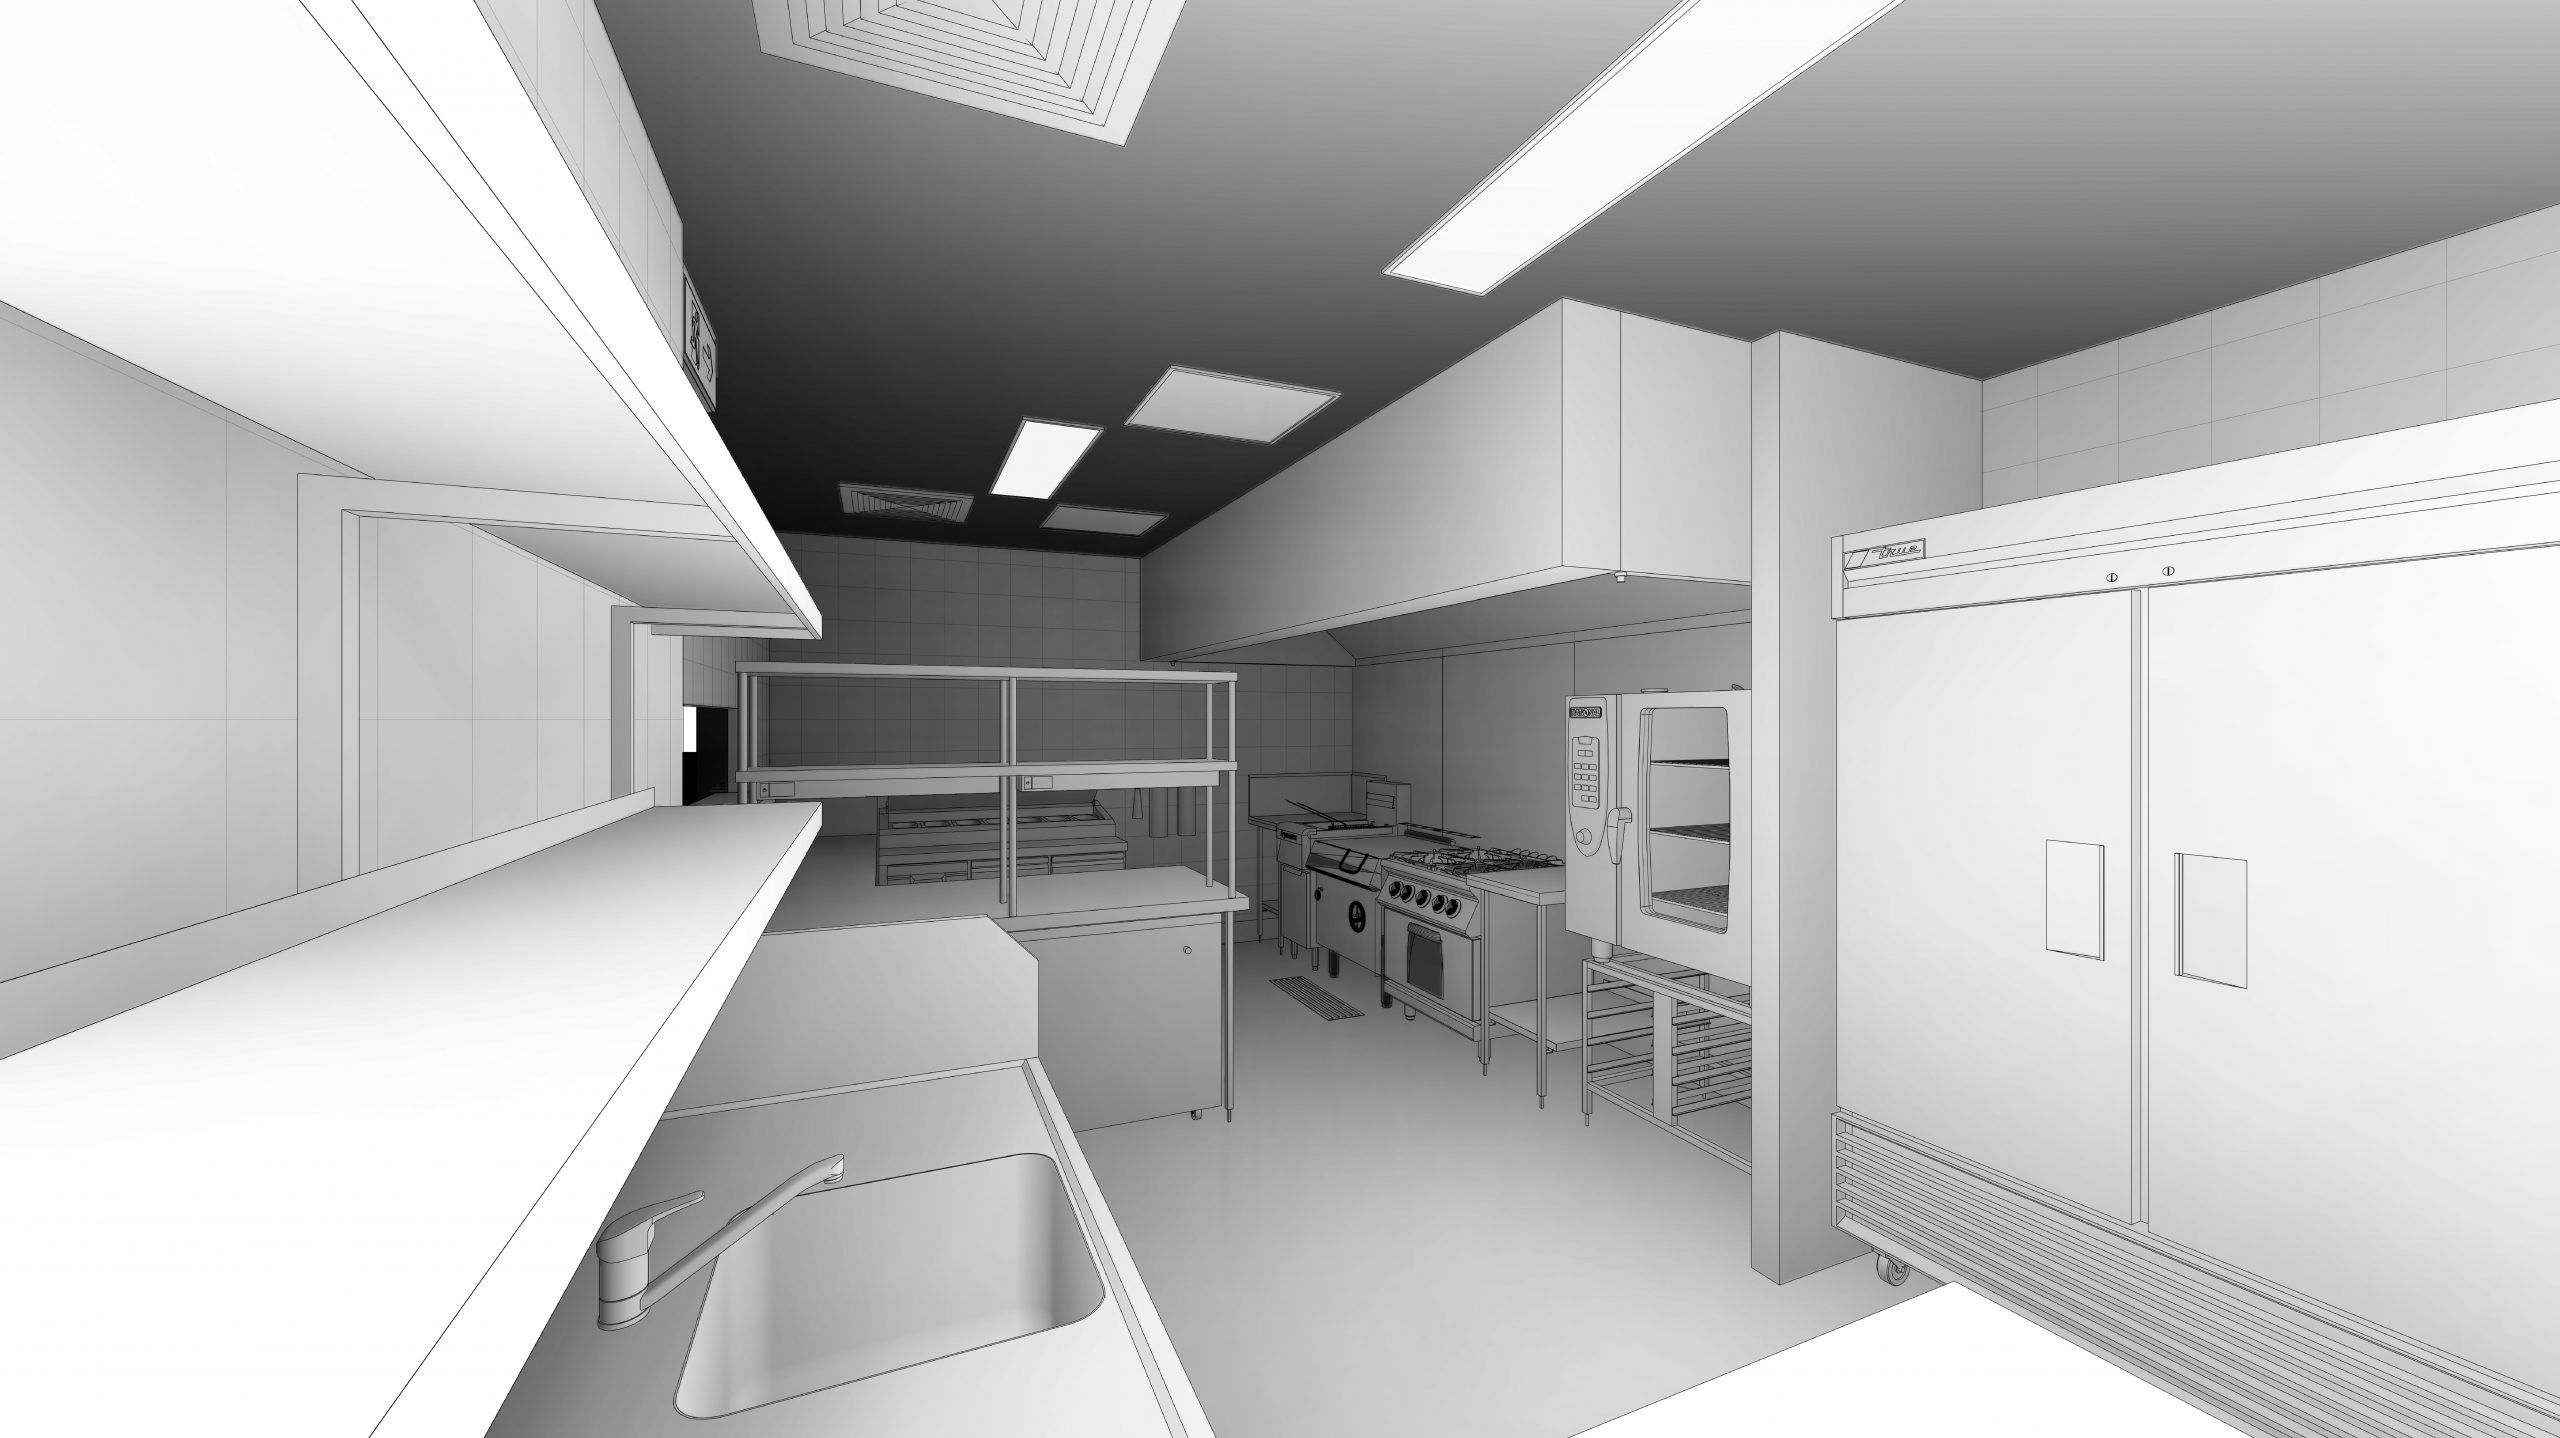 kitchen design for middle school